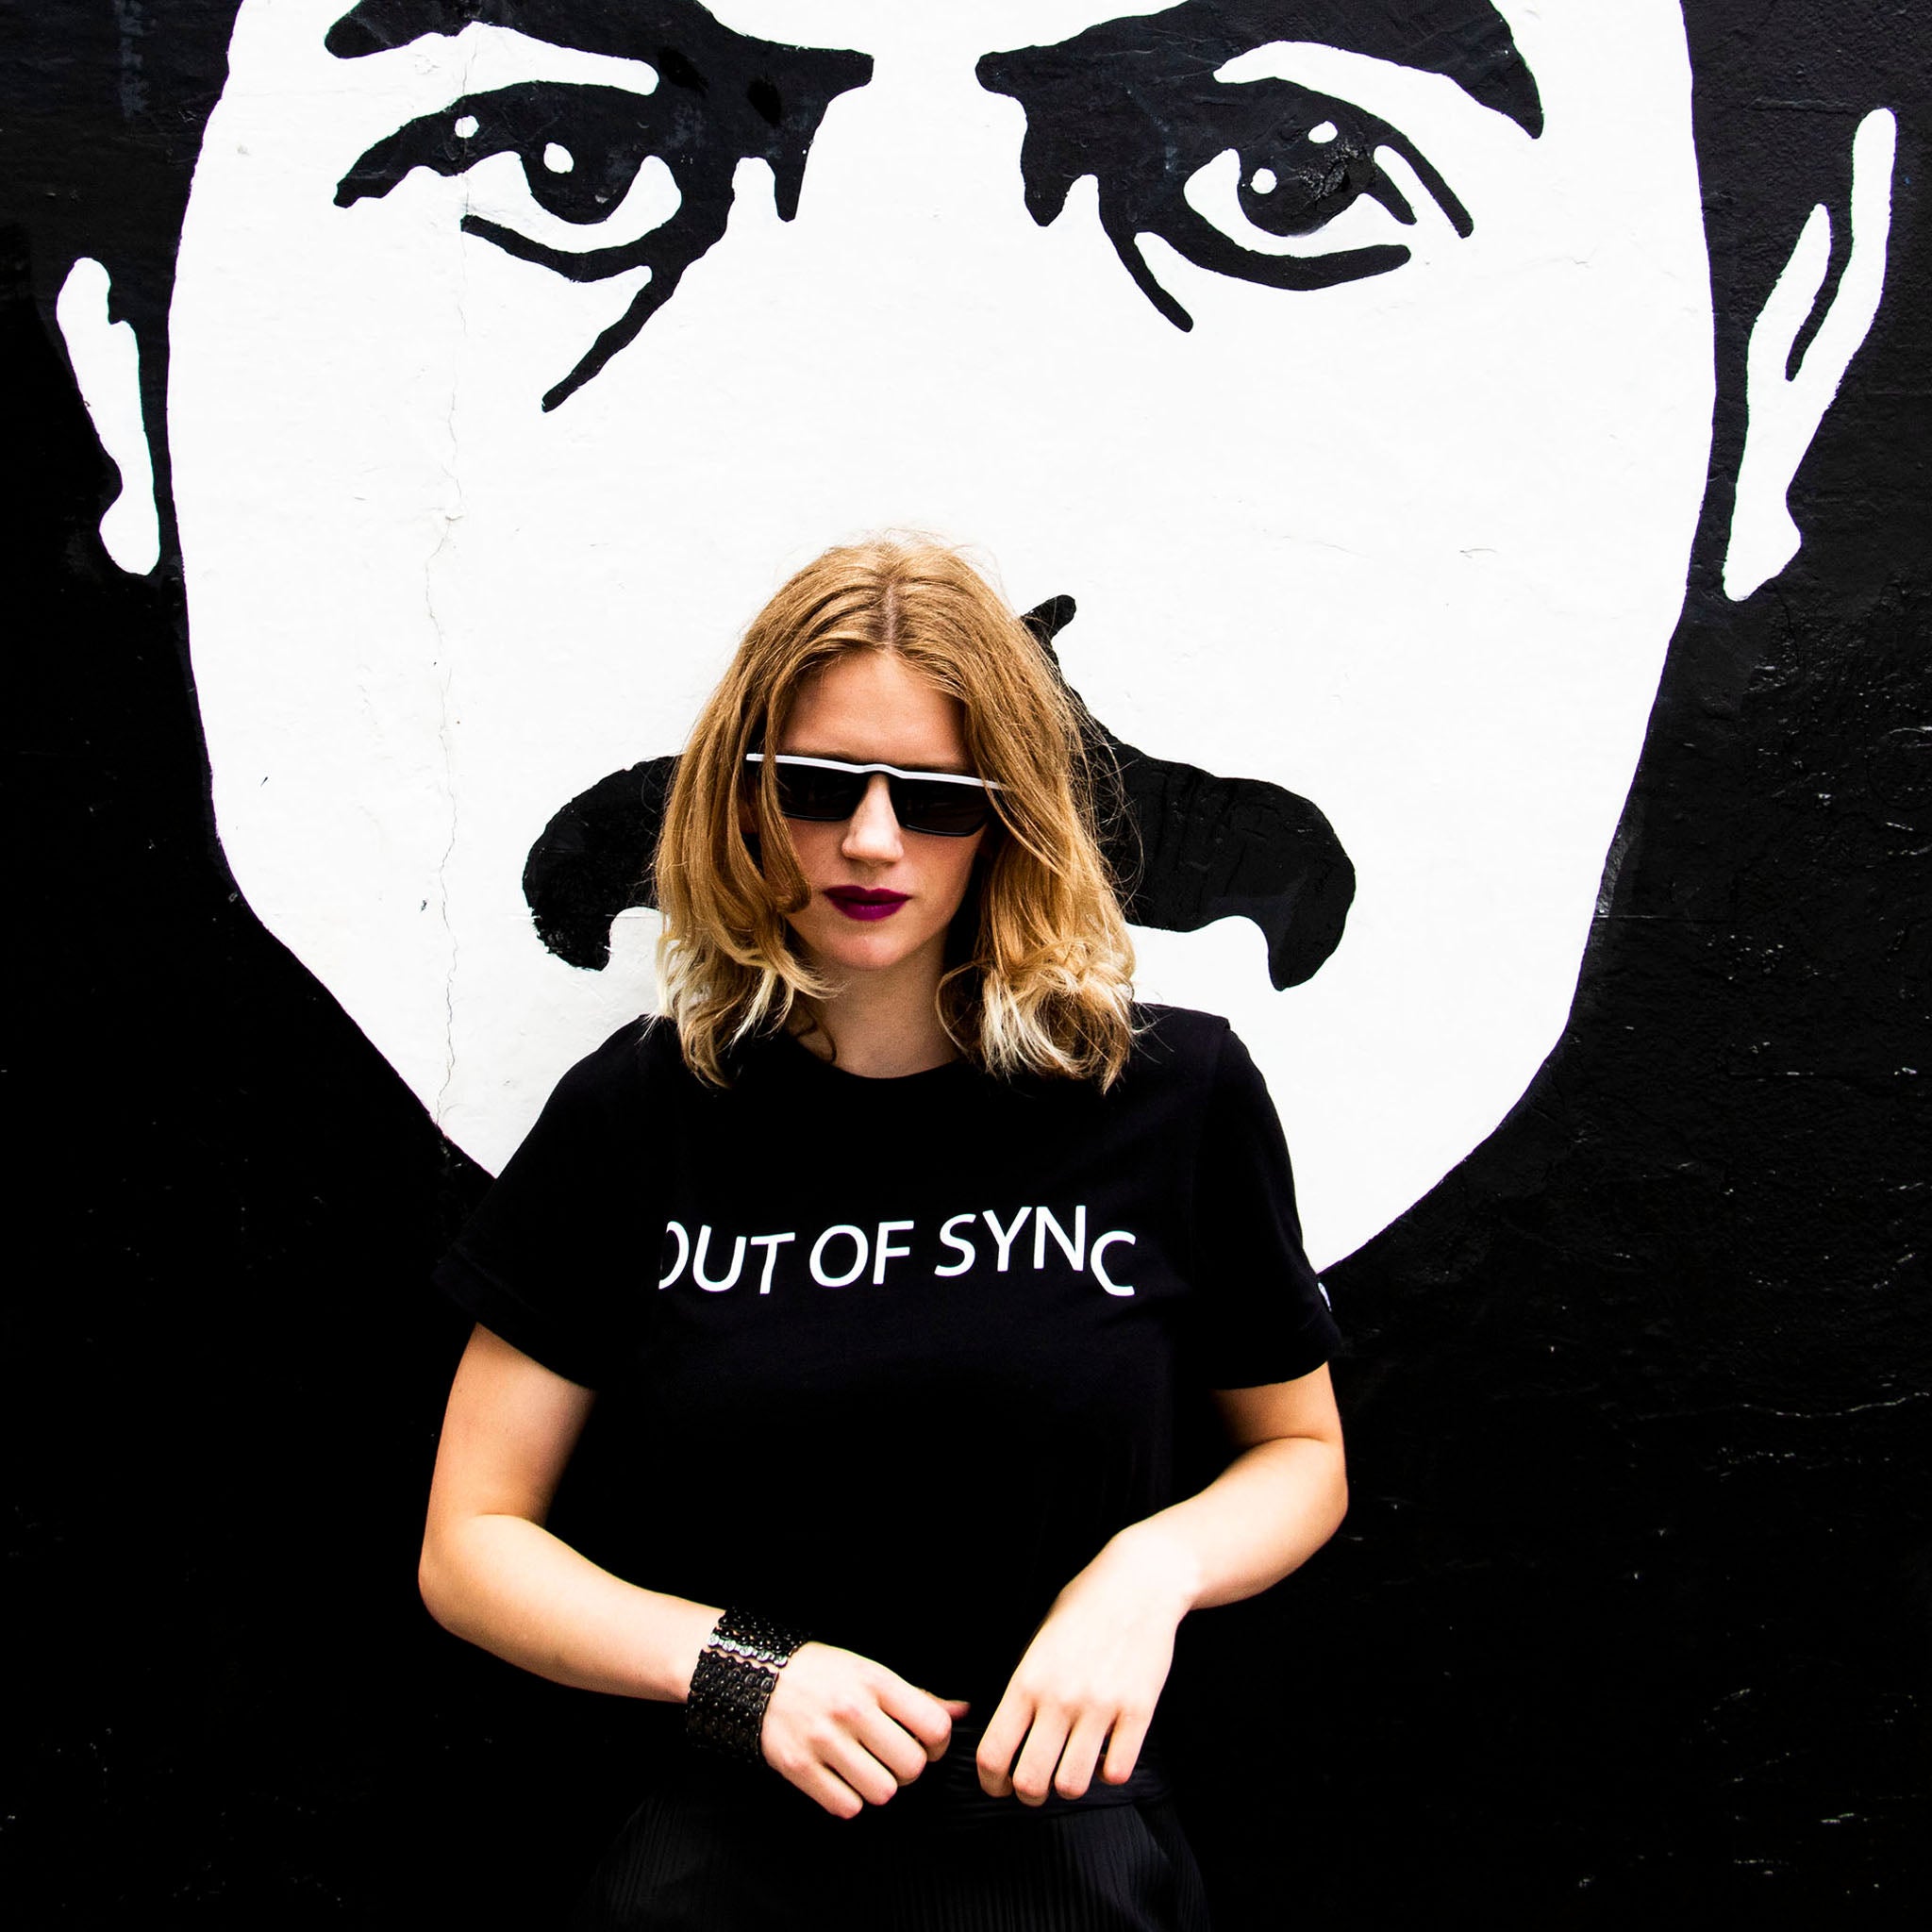 Out of Sync designer logo tee screen printed